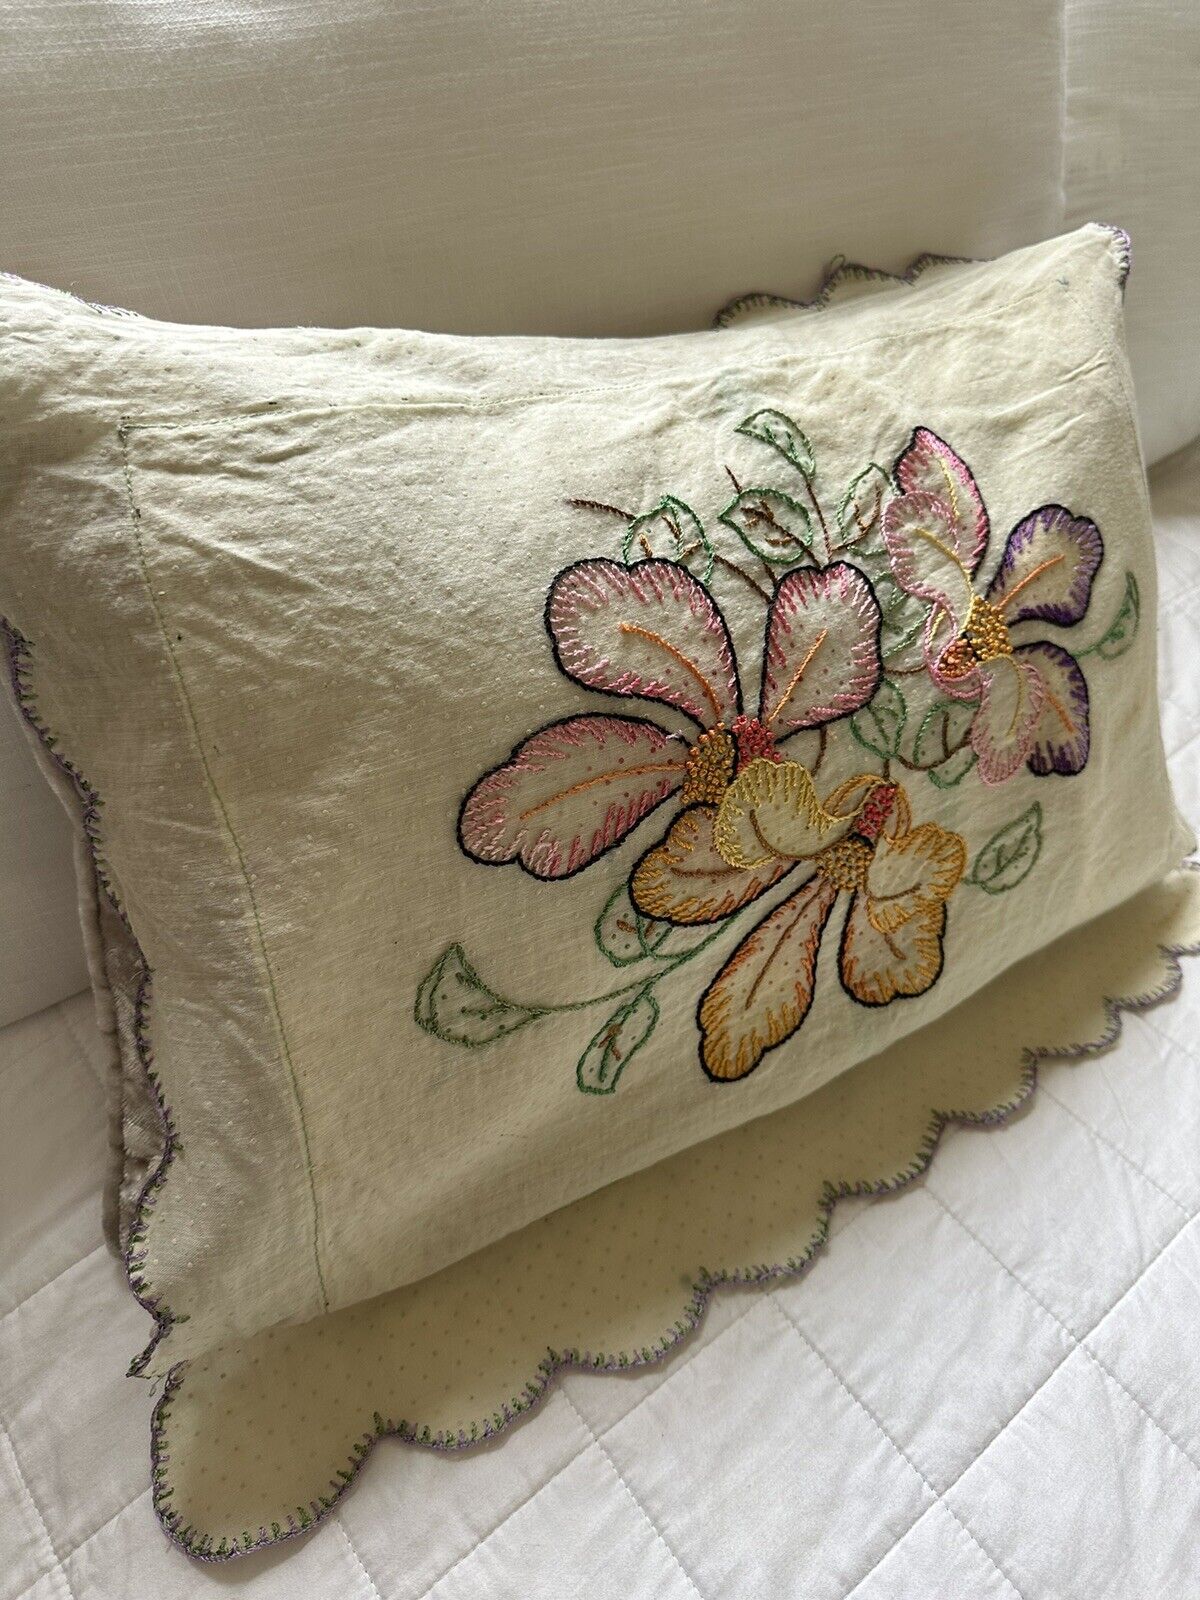 Vintage Antique Embroidery Handkerchief Pillow Cover Floral Hankie Scalloped